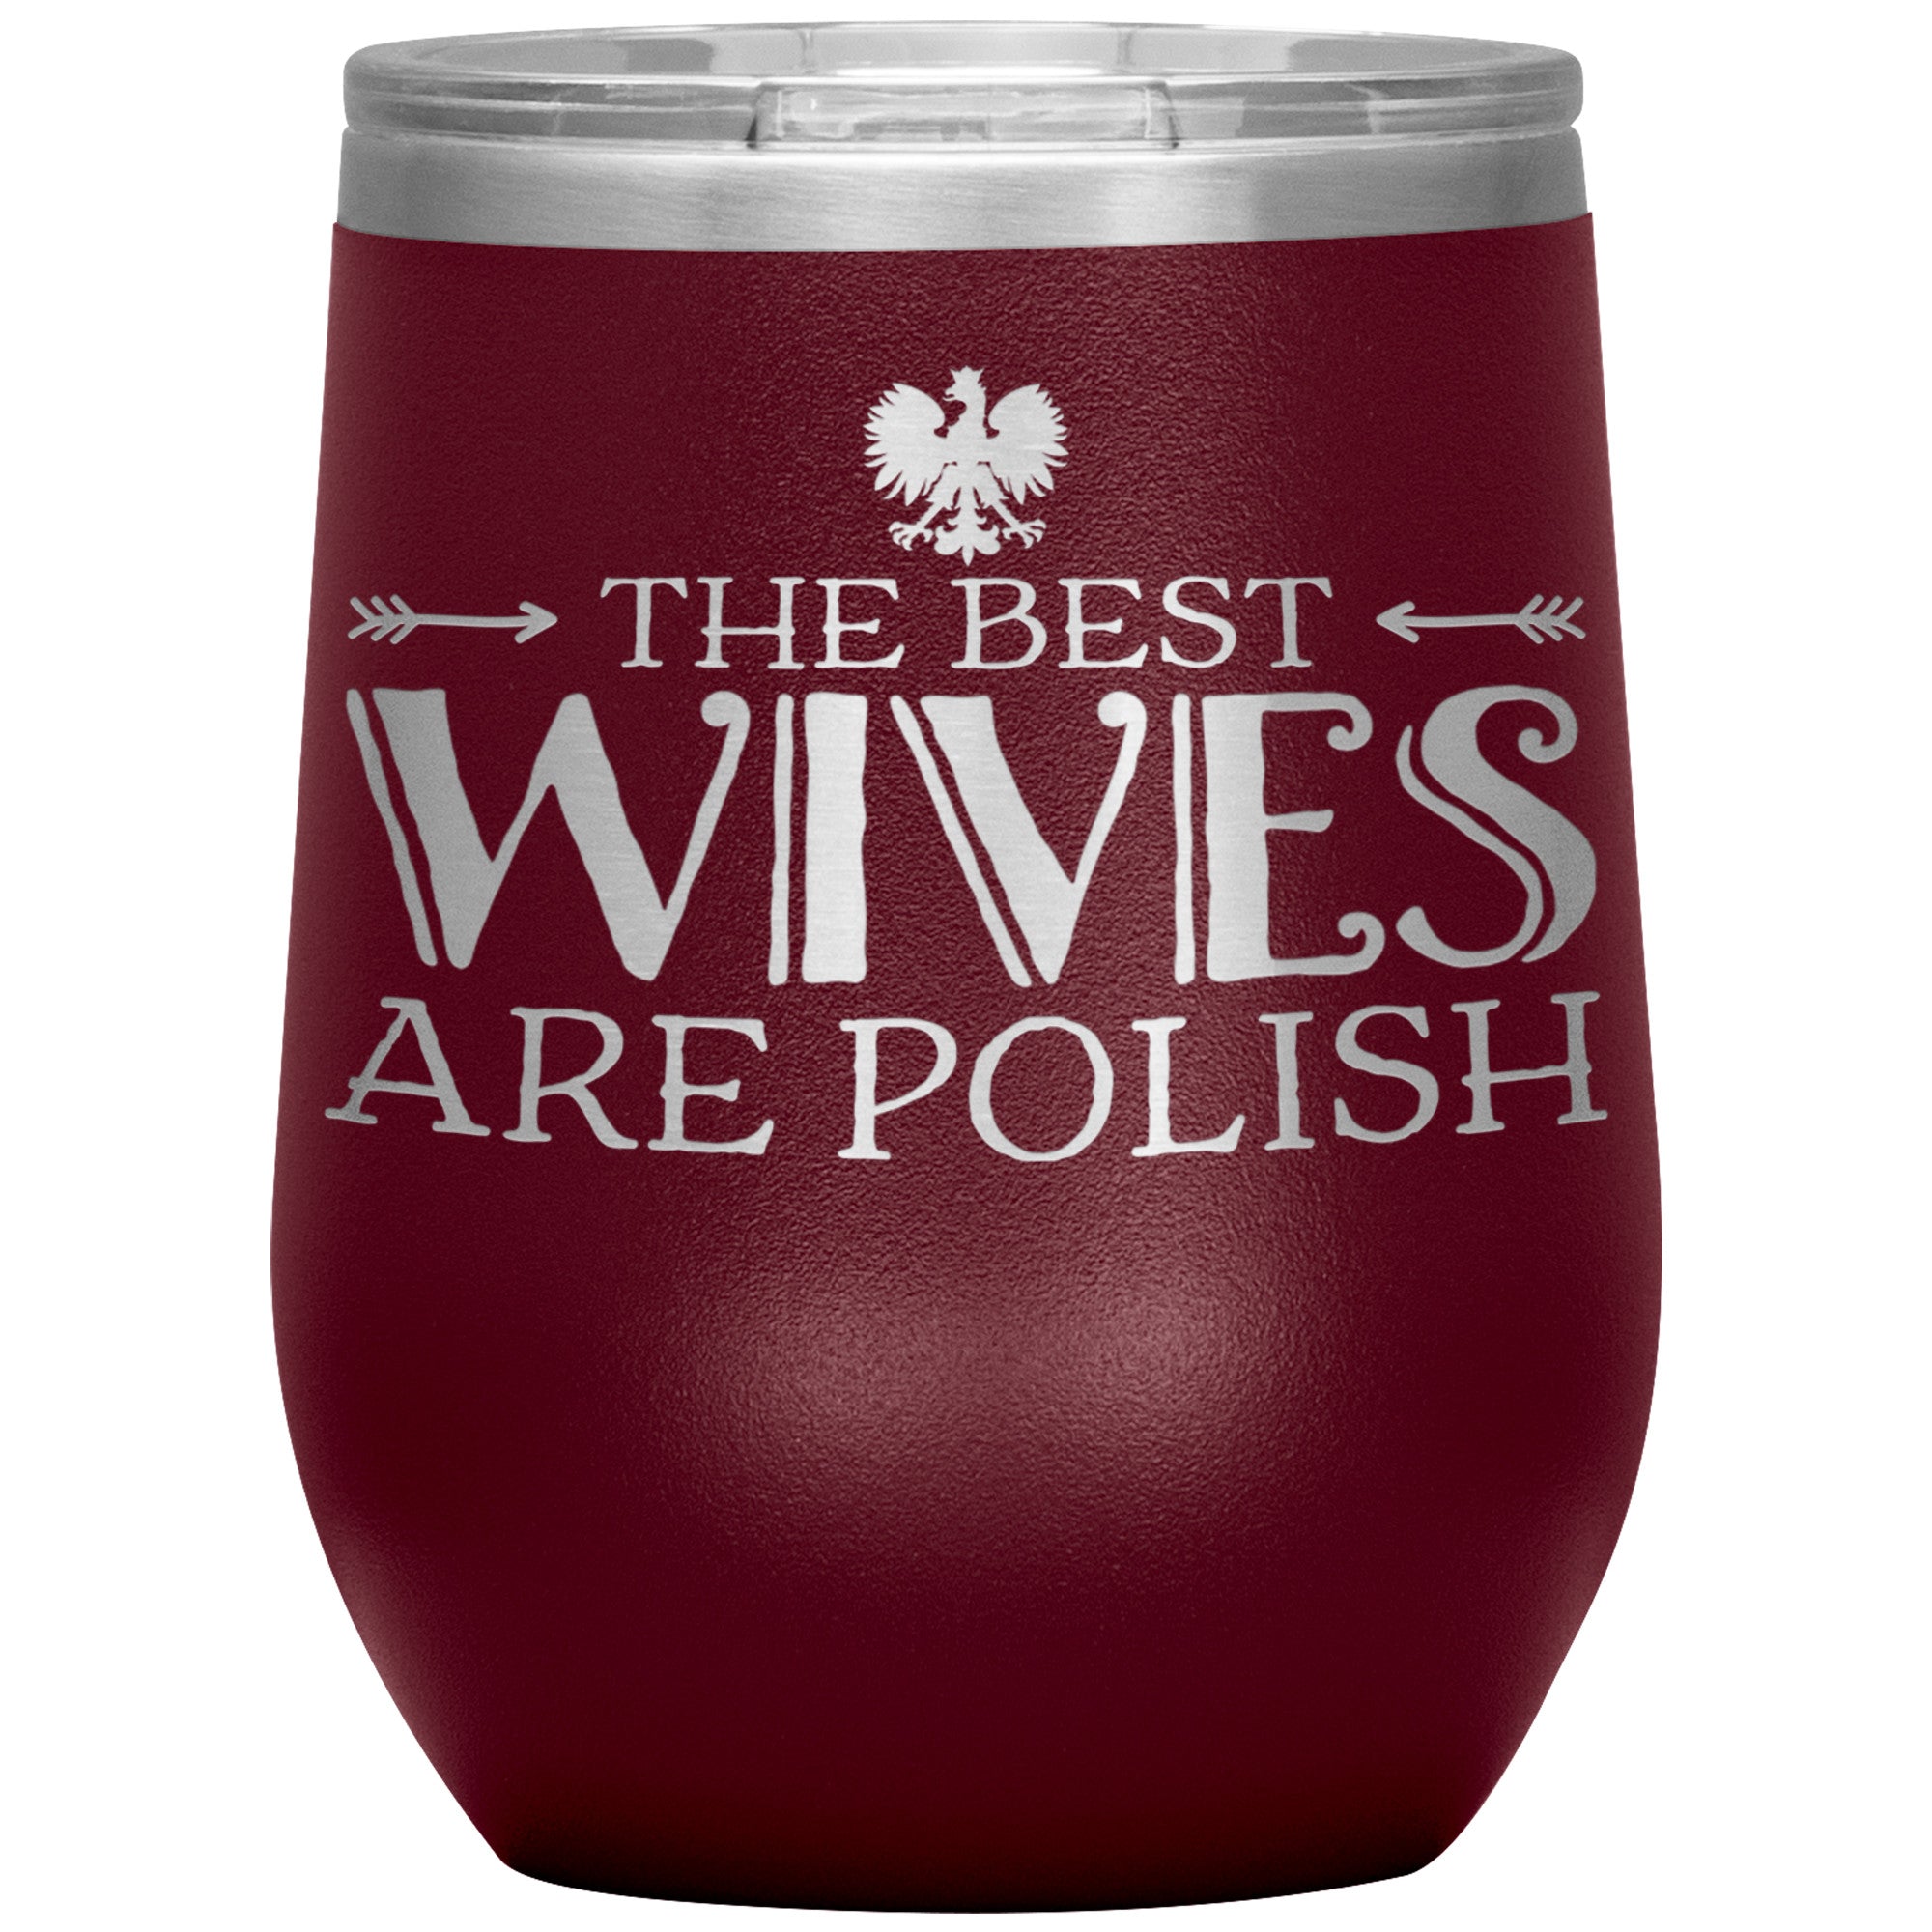 The Best Wives Are Polish Insulated Wine Tumbler Tumblers teelaunch Maroon  